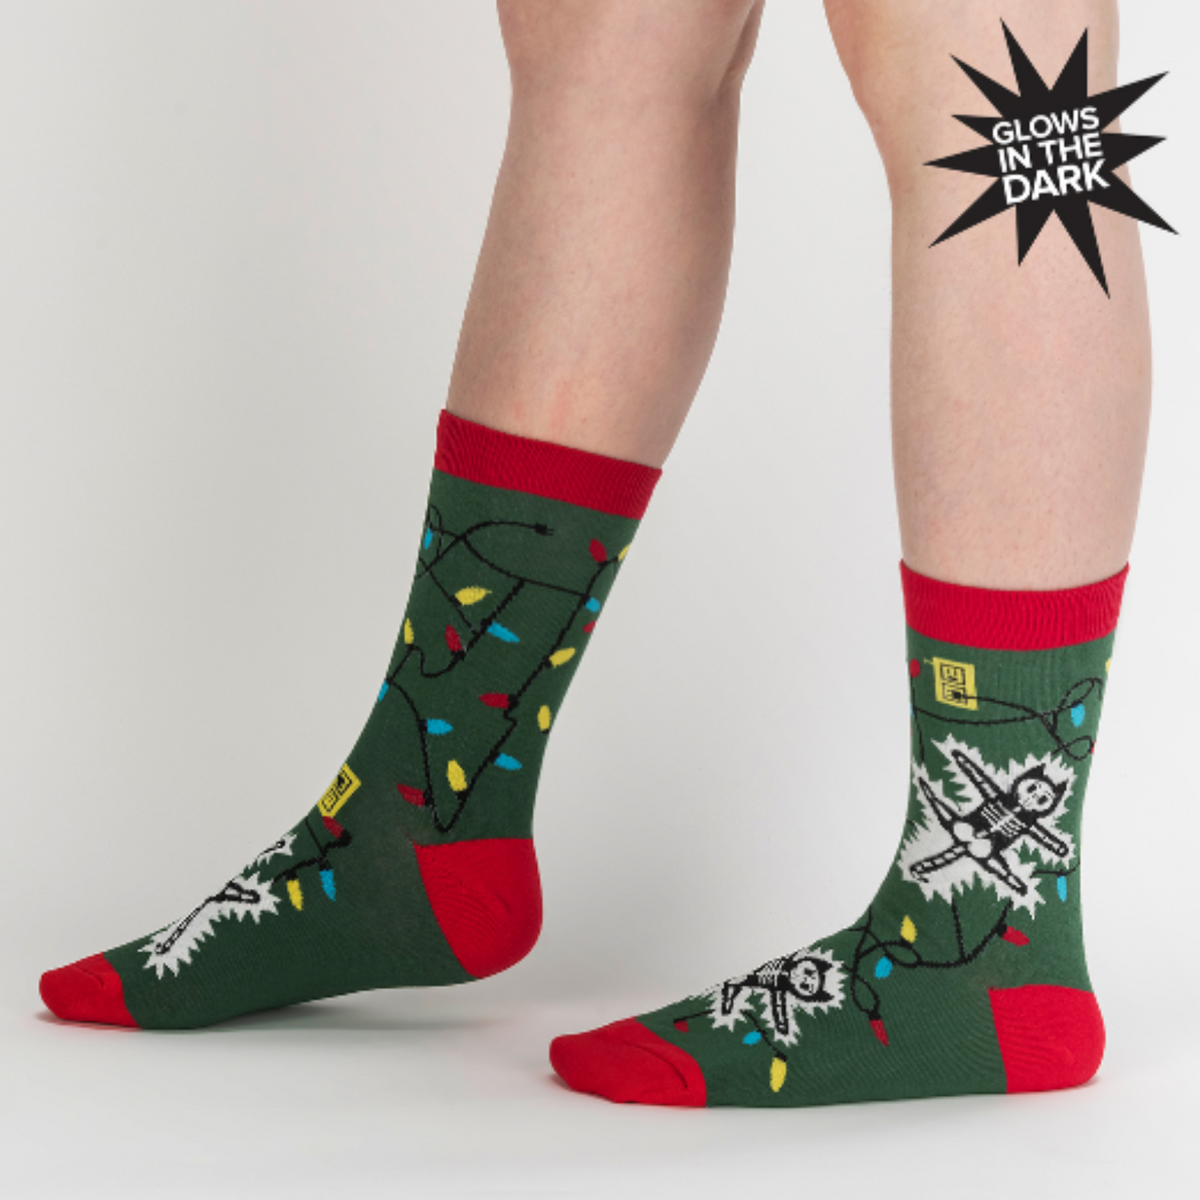 Sock It To Me Eating Light This Holiday (GLOWS IN THE DARK) women&#39;s and men&#39;s crew socks featuring green sock with red cuff, heel, and toe with cartoon cat being electrocuted by Christmas lights. Socks worn by female model seen from side. 